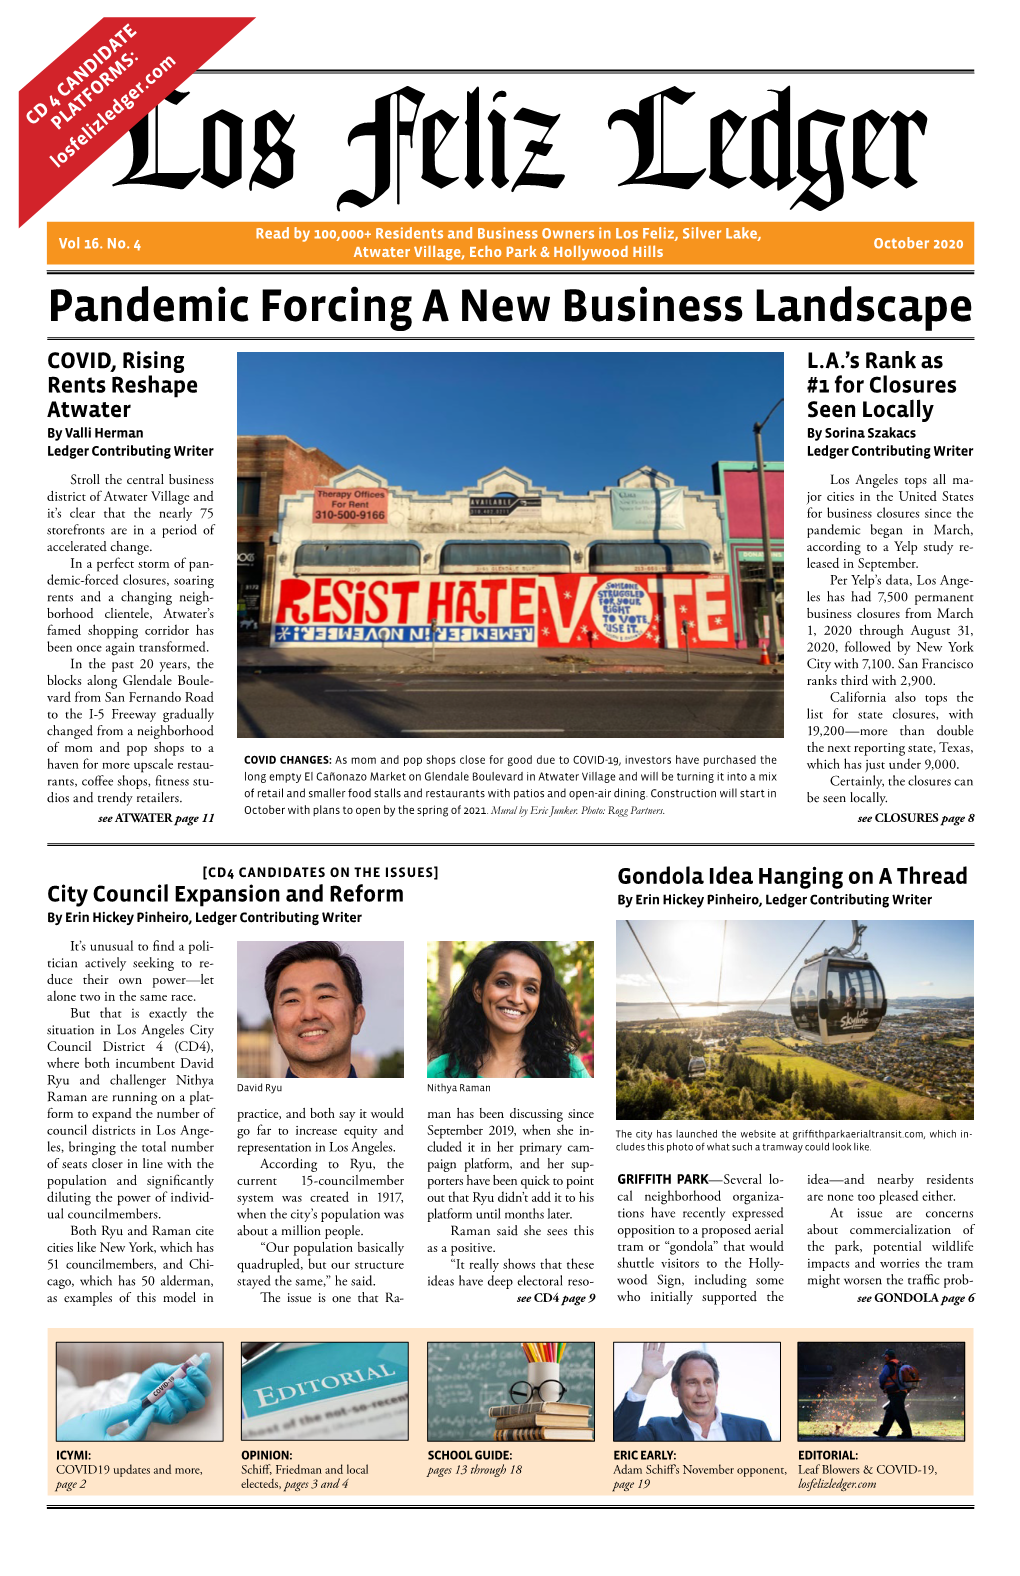 Pandemic Forcing a New Business Landscape